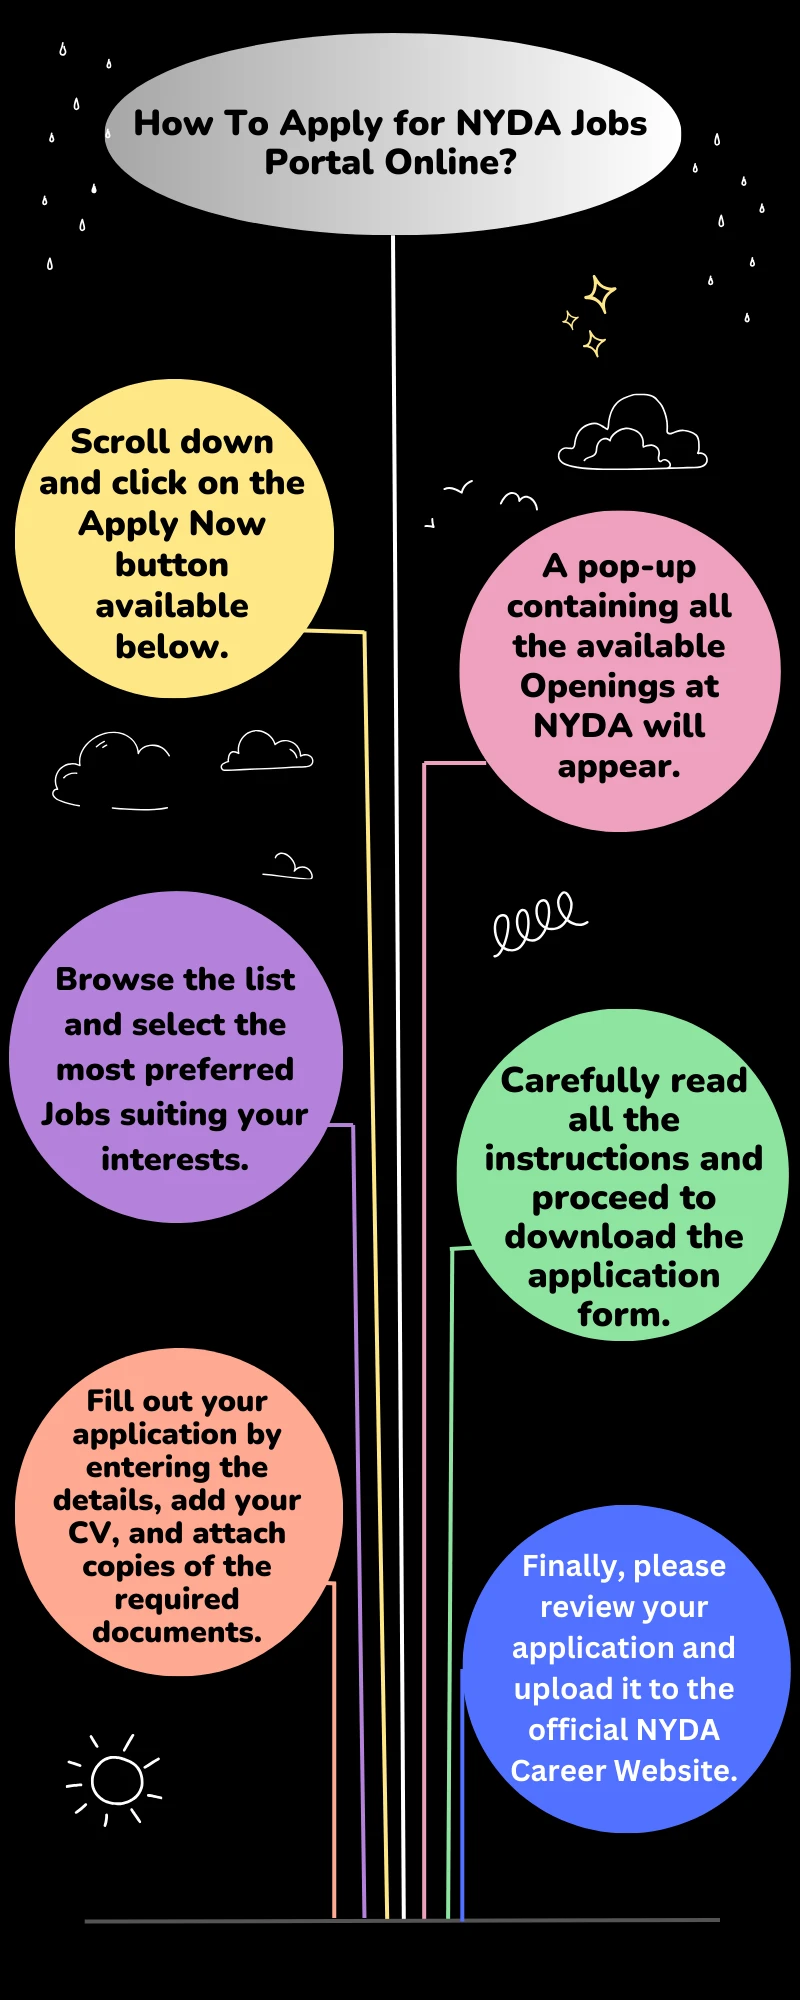 How To Apply for NYDA Jobs Portal Online?